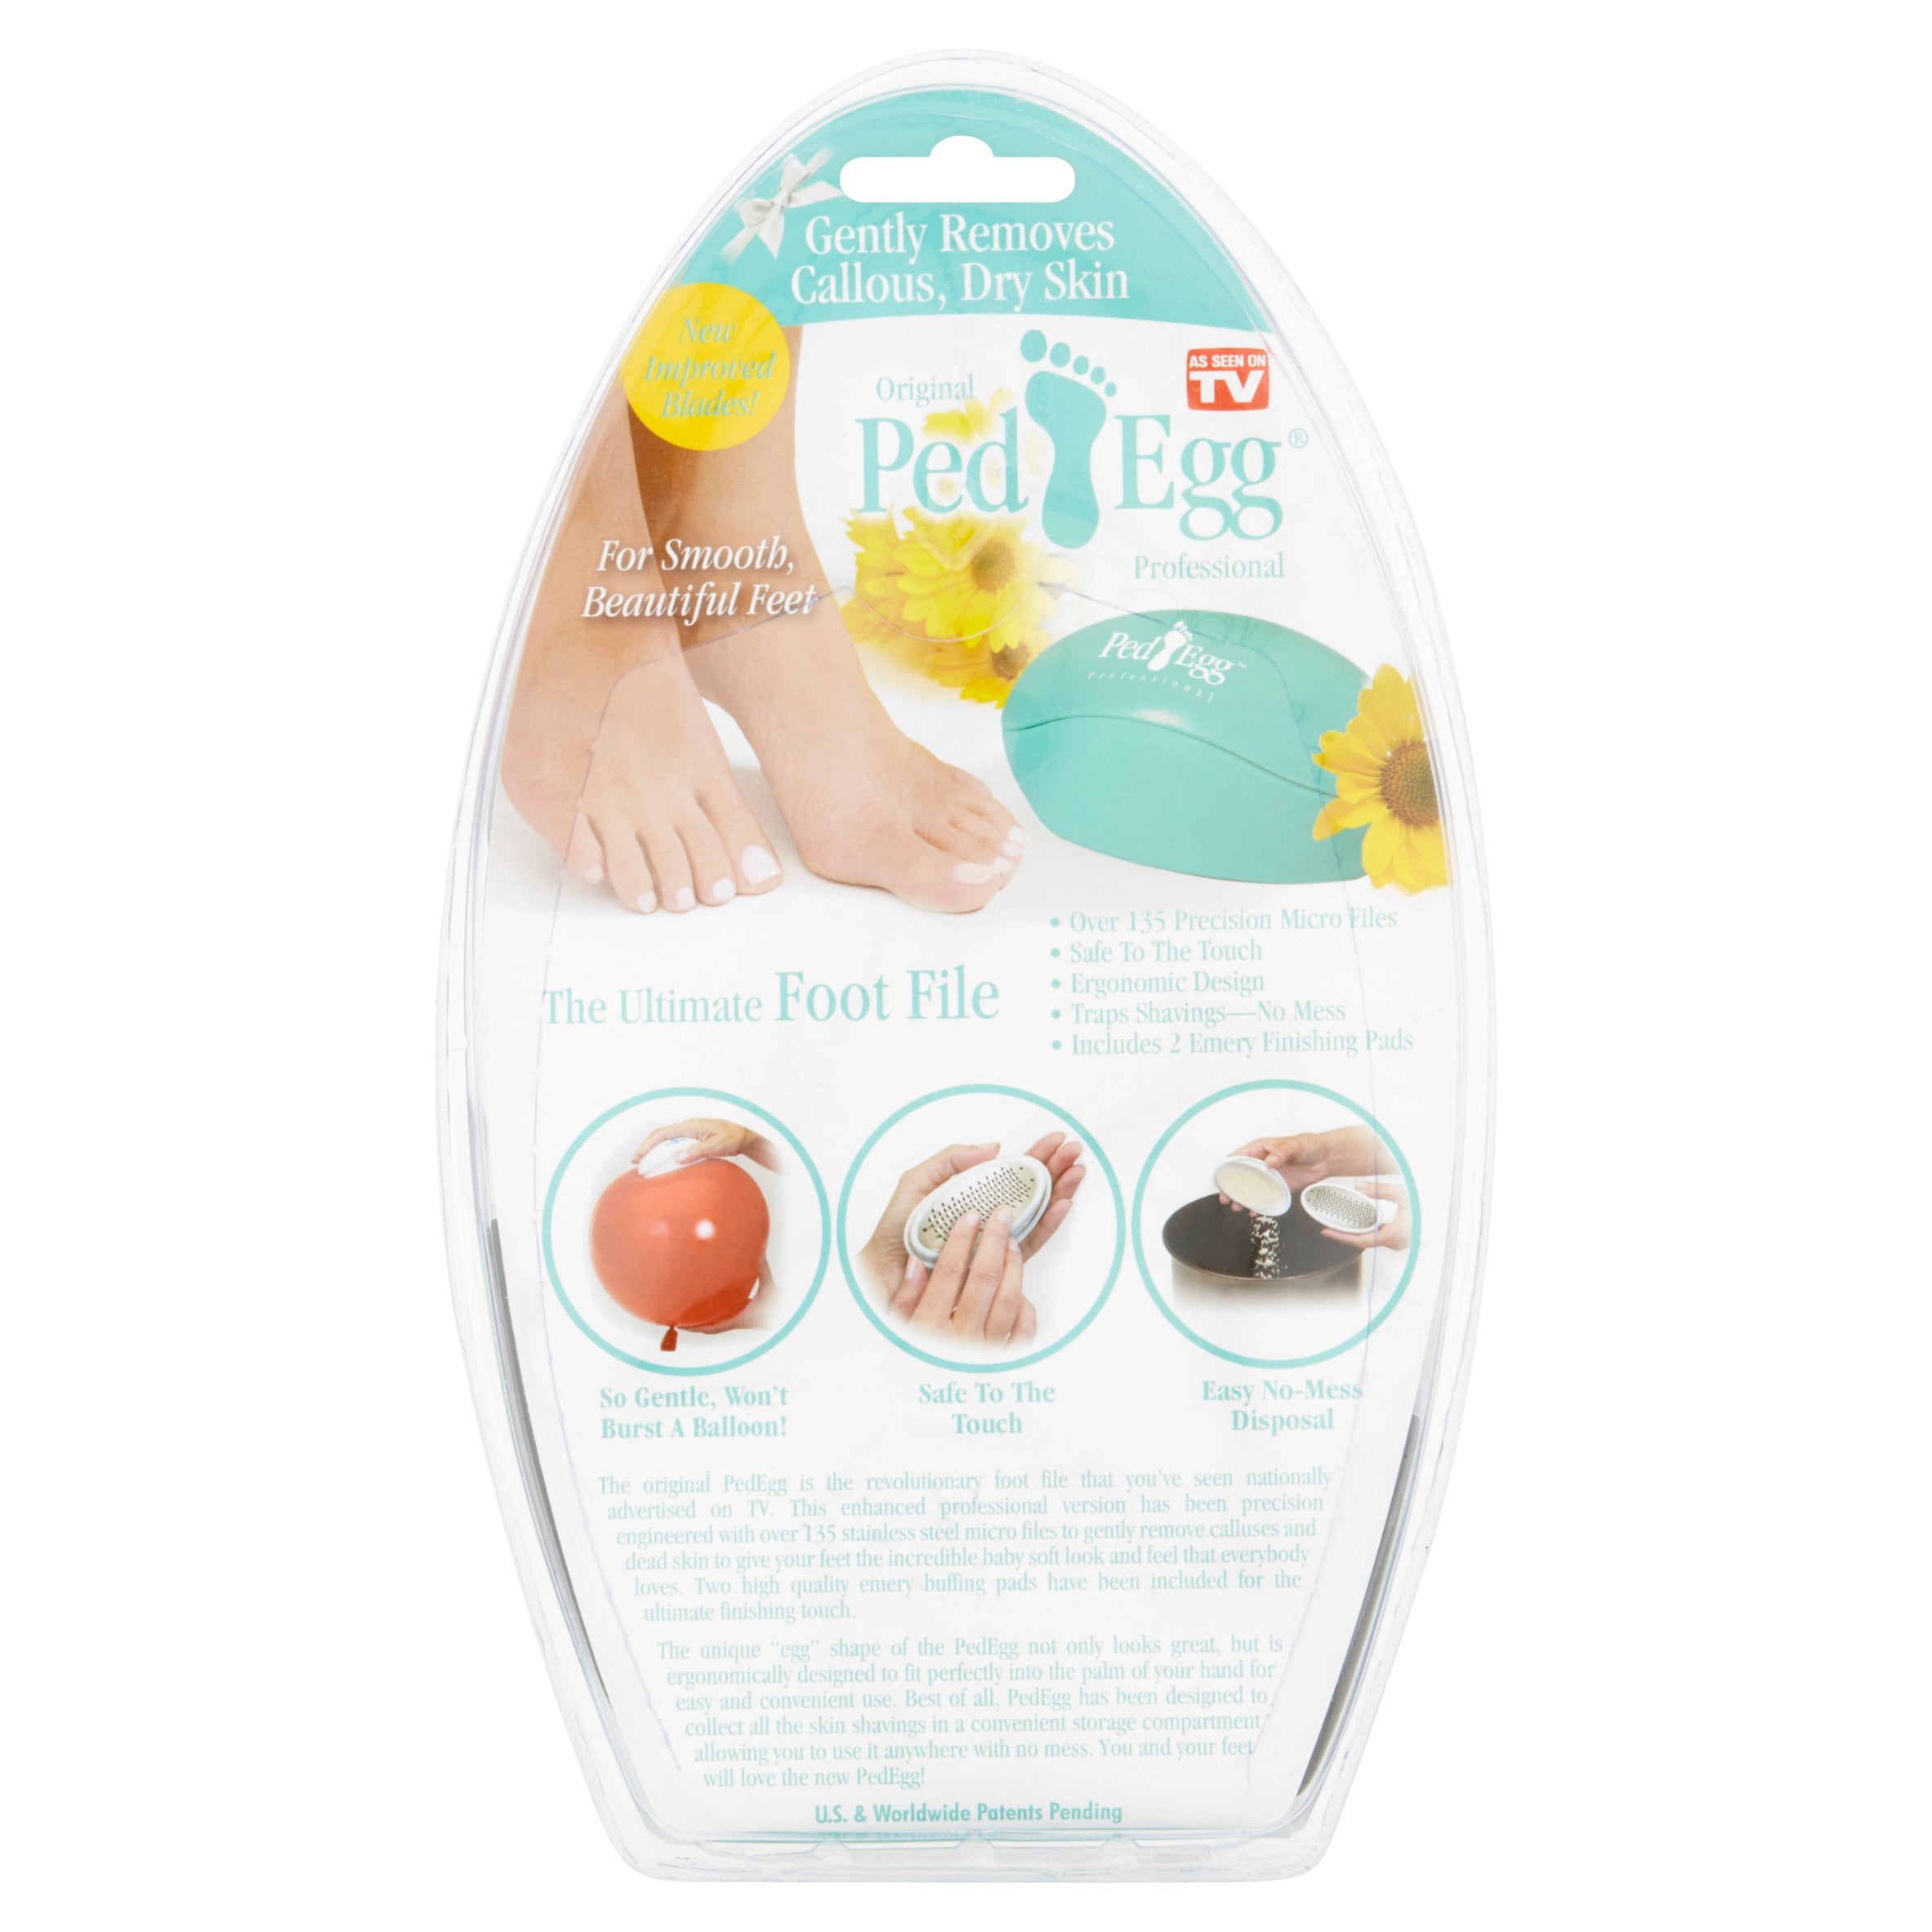 Telebrands Ped Egg Foot File The Ultimate - Each - Star Market